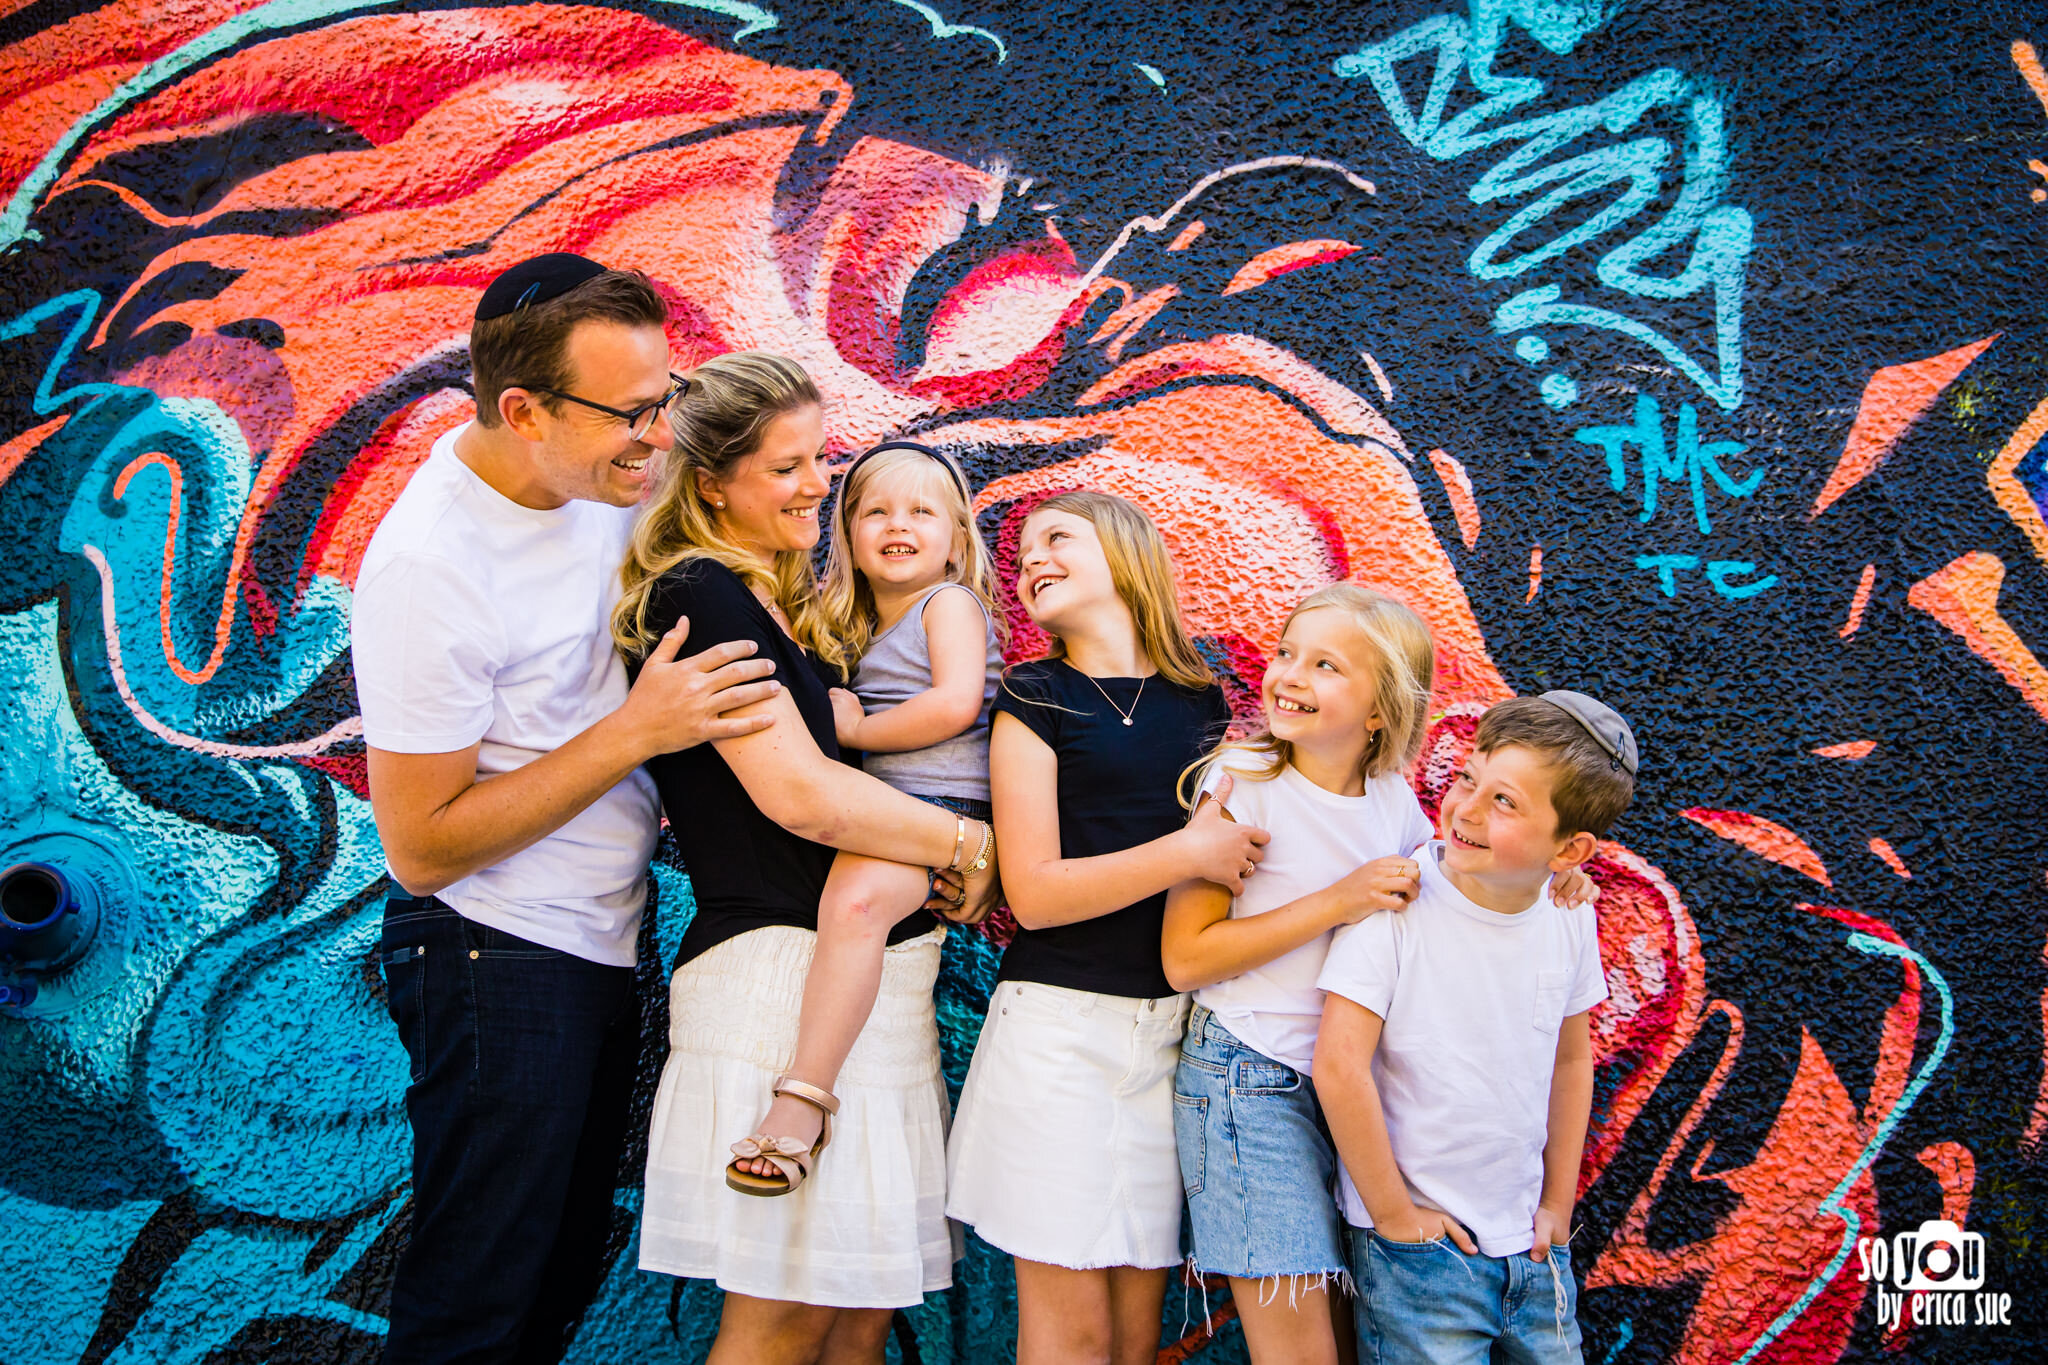 10-so-you-by-erica-sue-extended-family-session-wynwood-lifestyle-photographer-CD8A7199.jpg